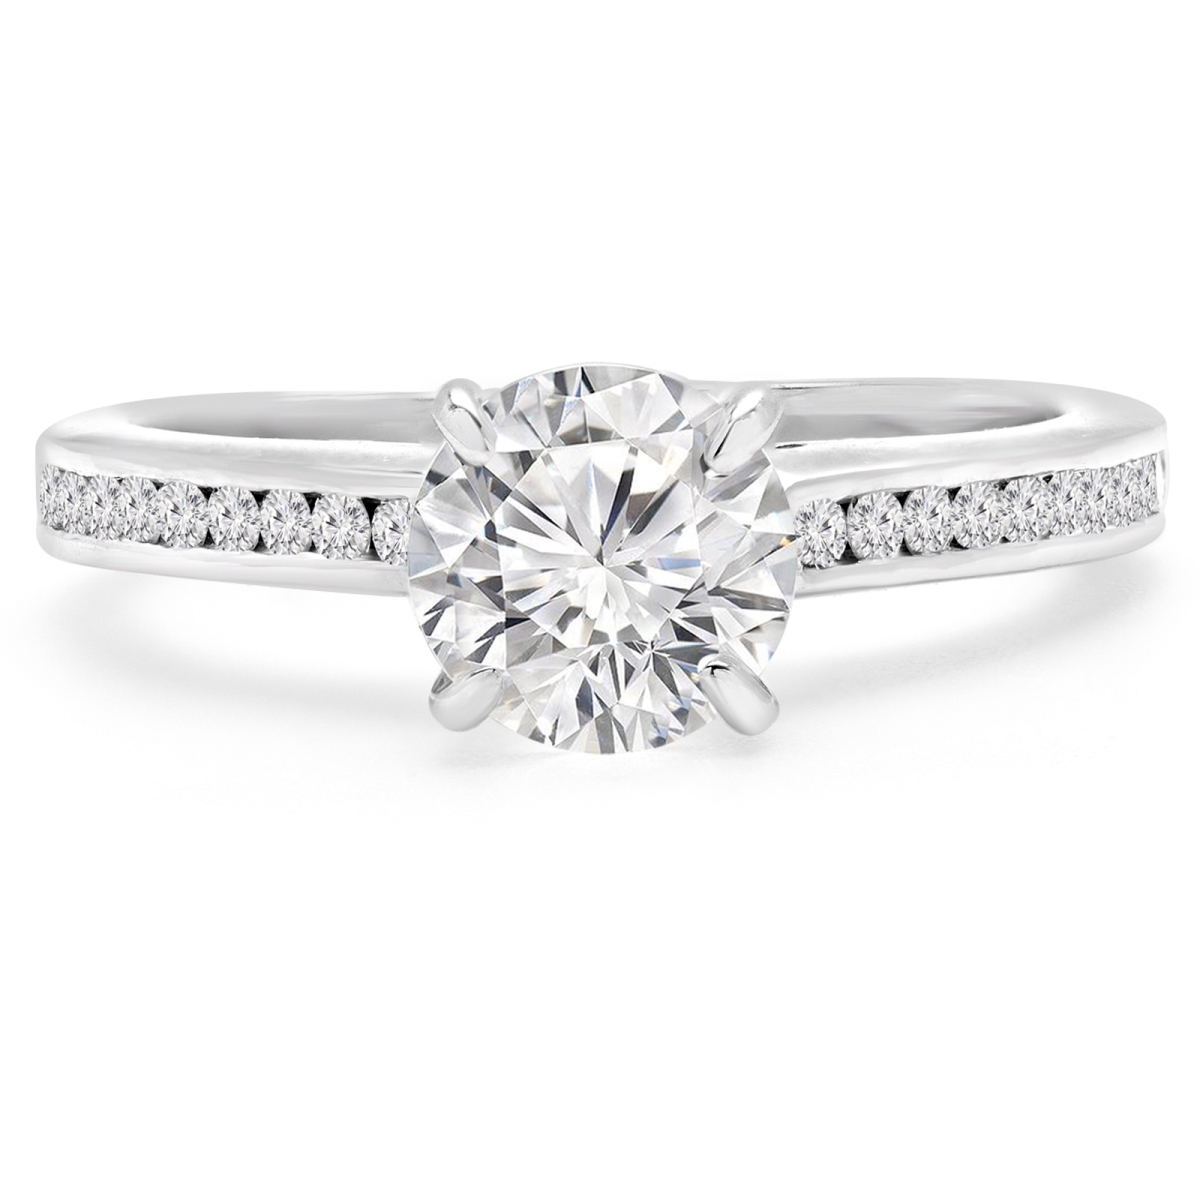 1.2 CTW Round Diamond Solitaire Engagement Ring with Channel Set Accents in 14K White Gold - Size 7.5 -  Great Gems, GR3066382